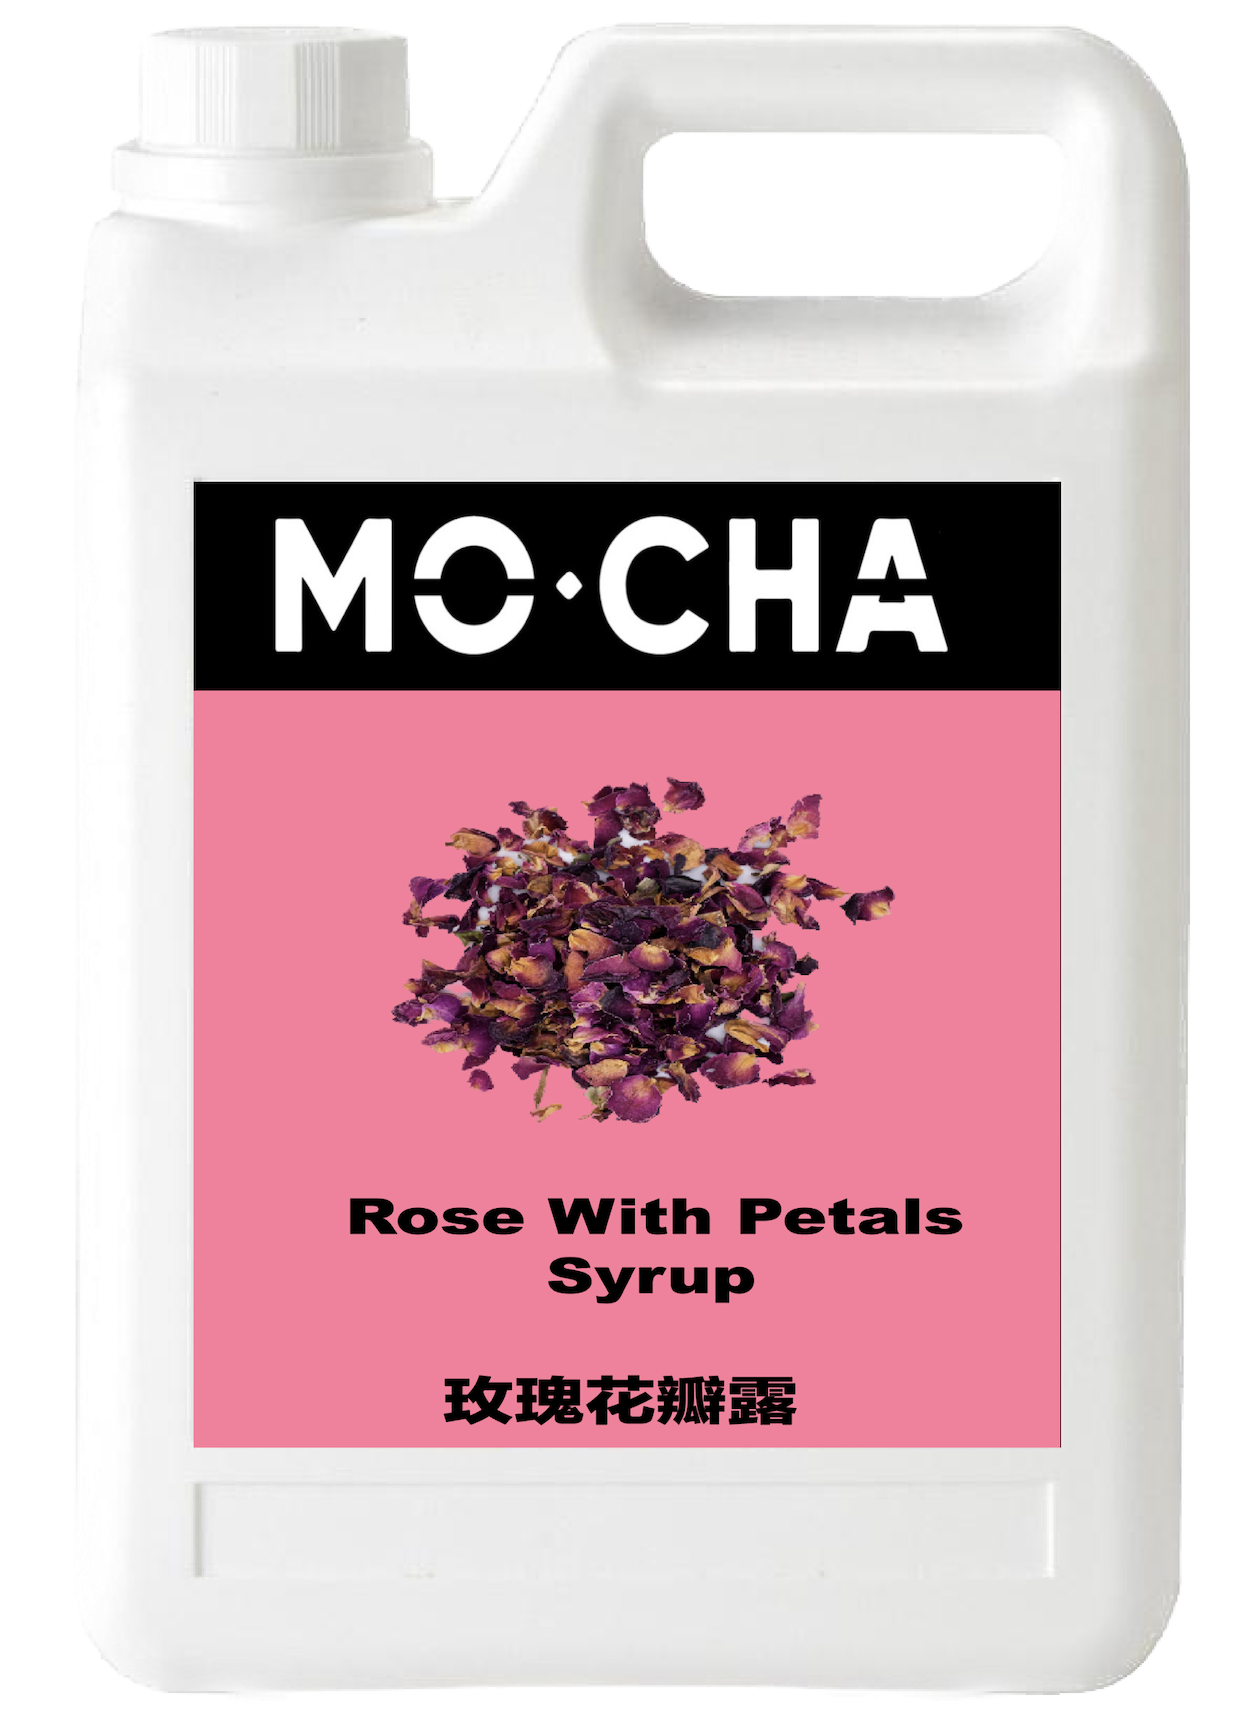 Rose Syrup with Petals Sample Bottle